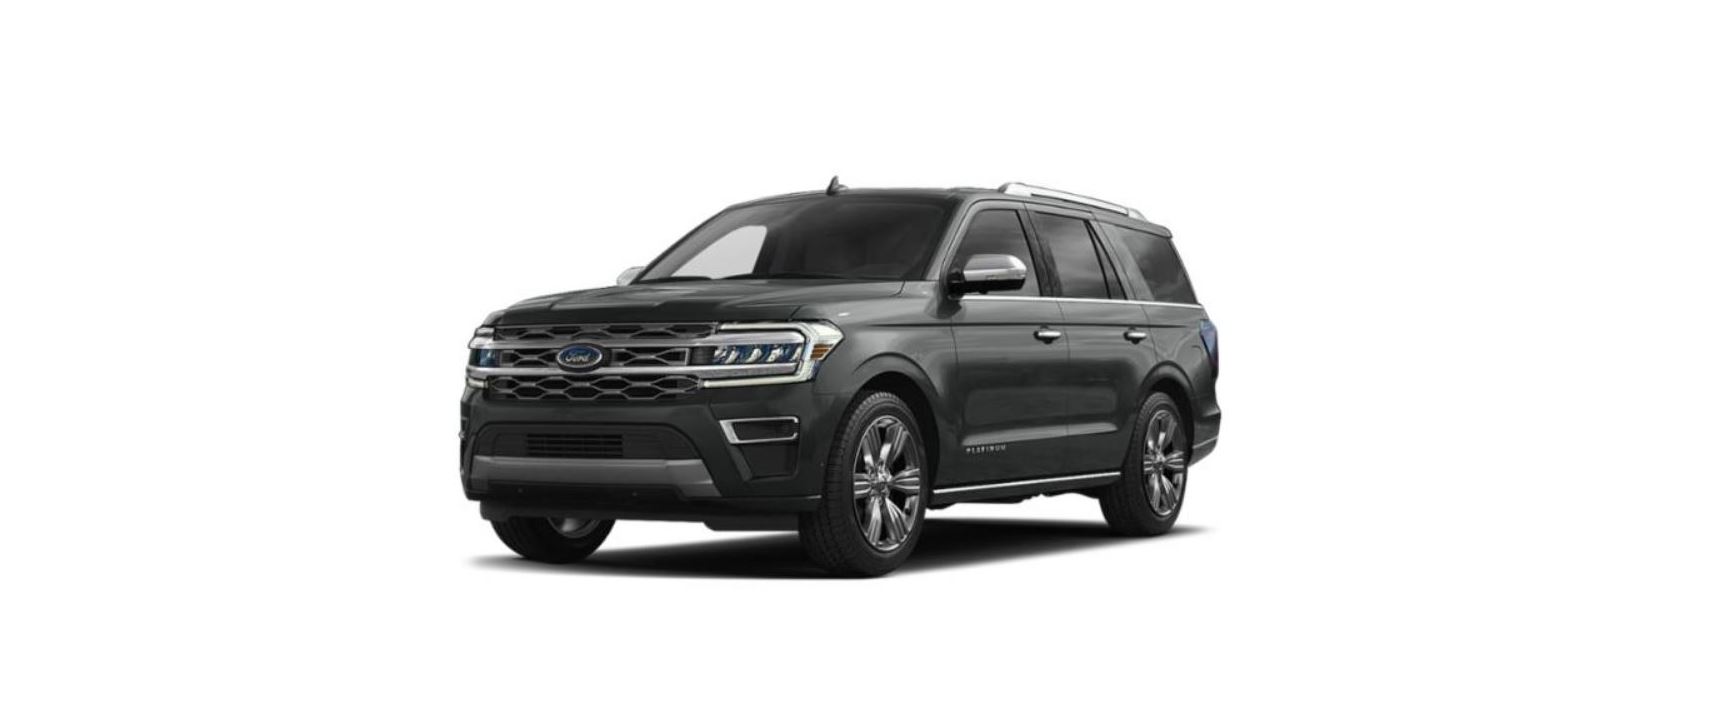 2022 Ford Expedition featue.